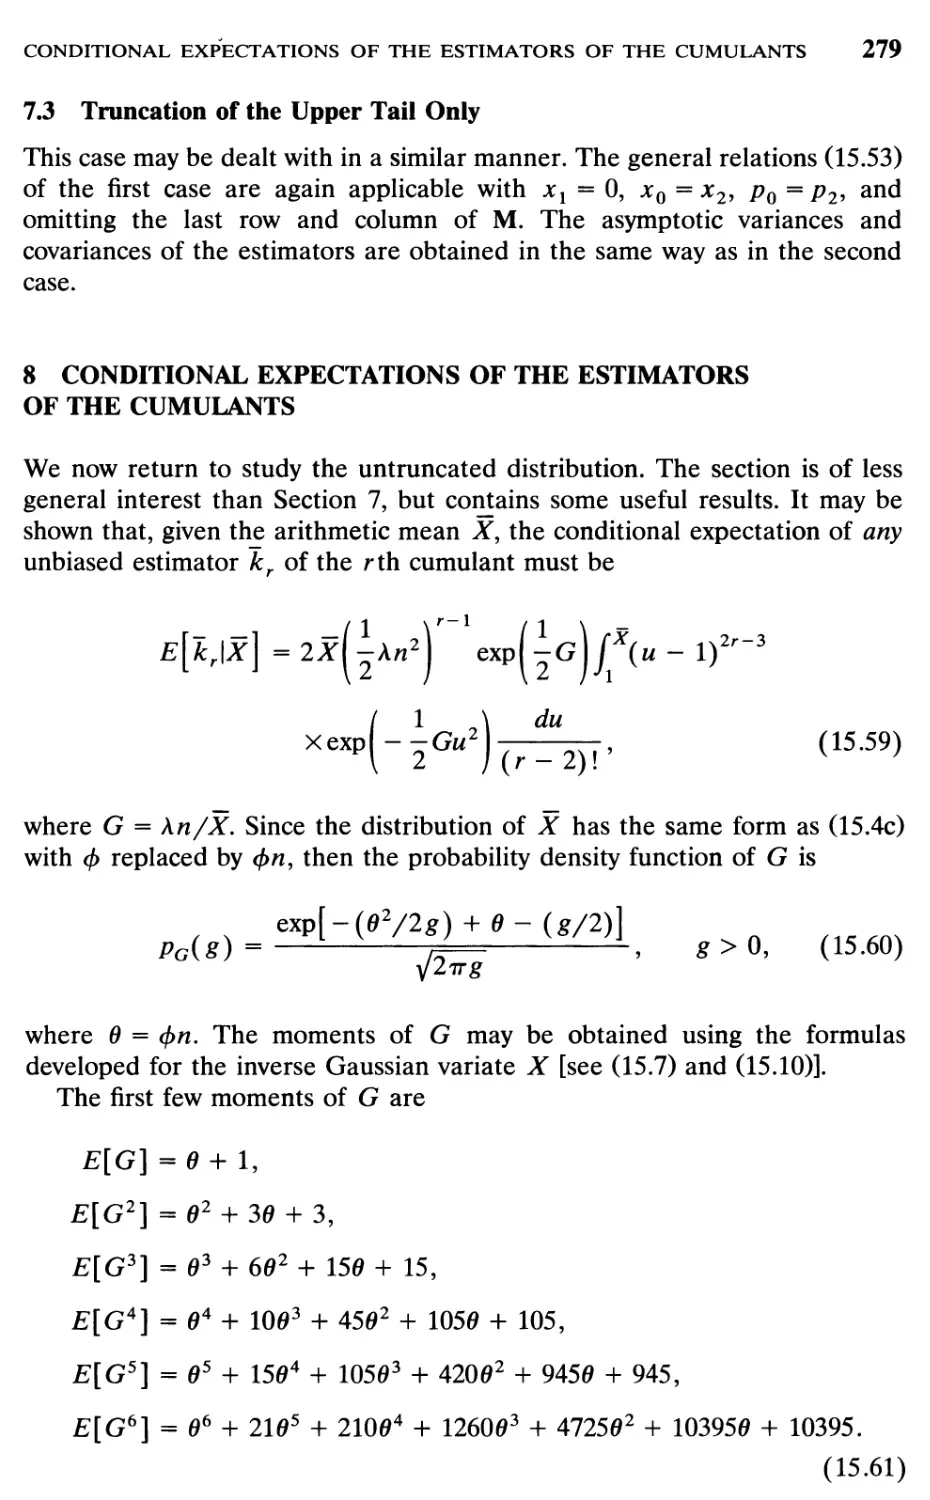 7.3 Truncation of the Upper Tail Only, 279
8 Conditional Expectations of the Estimators of the Cumulants, 279